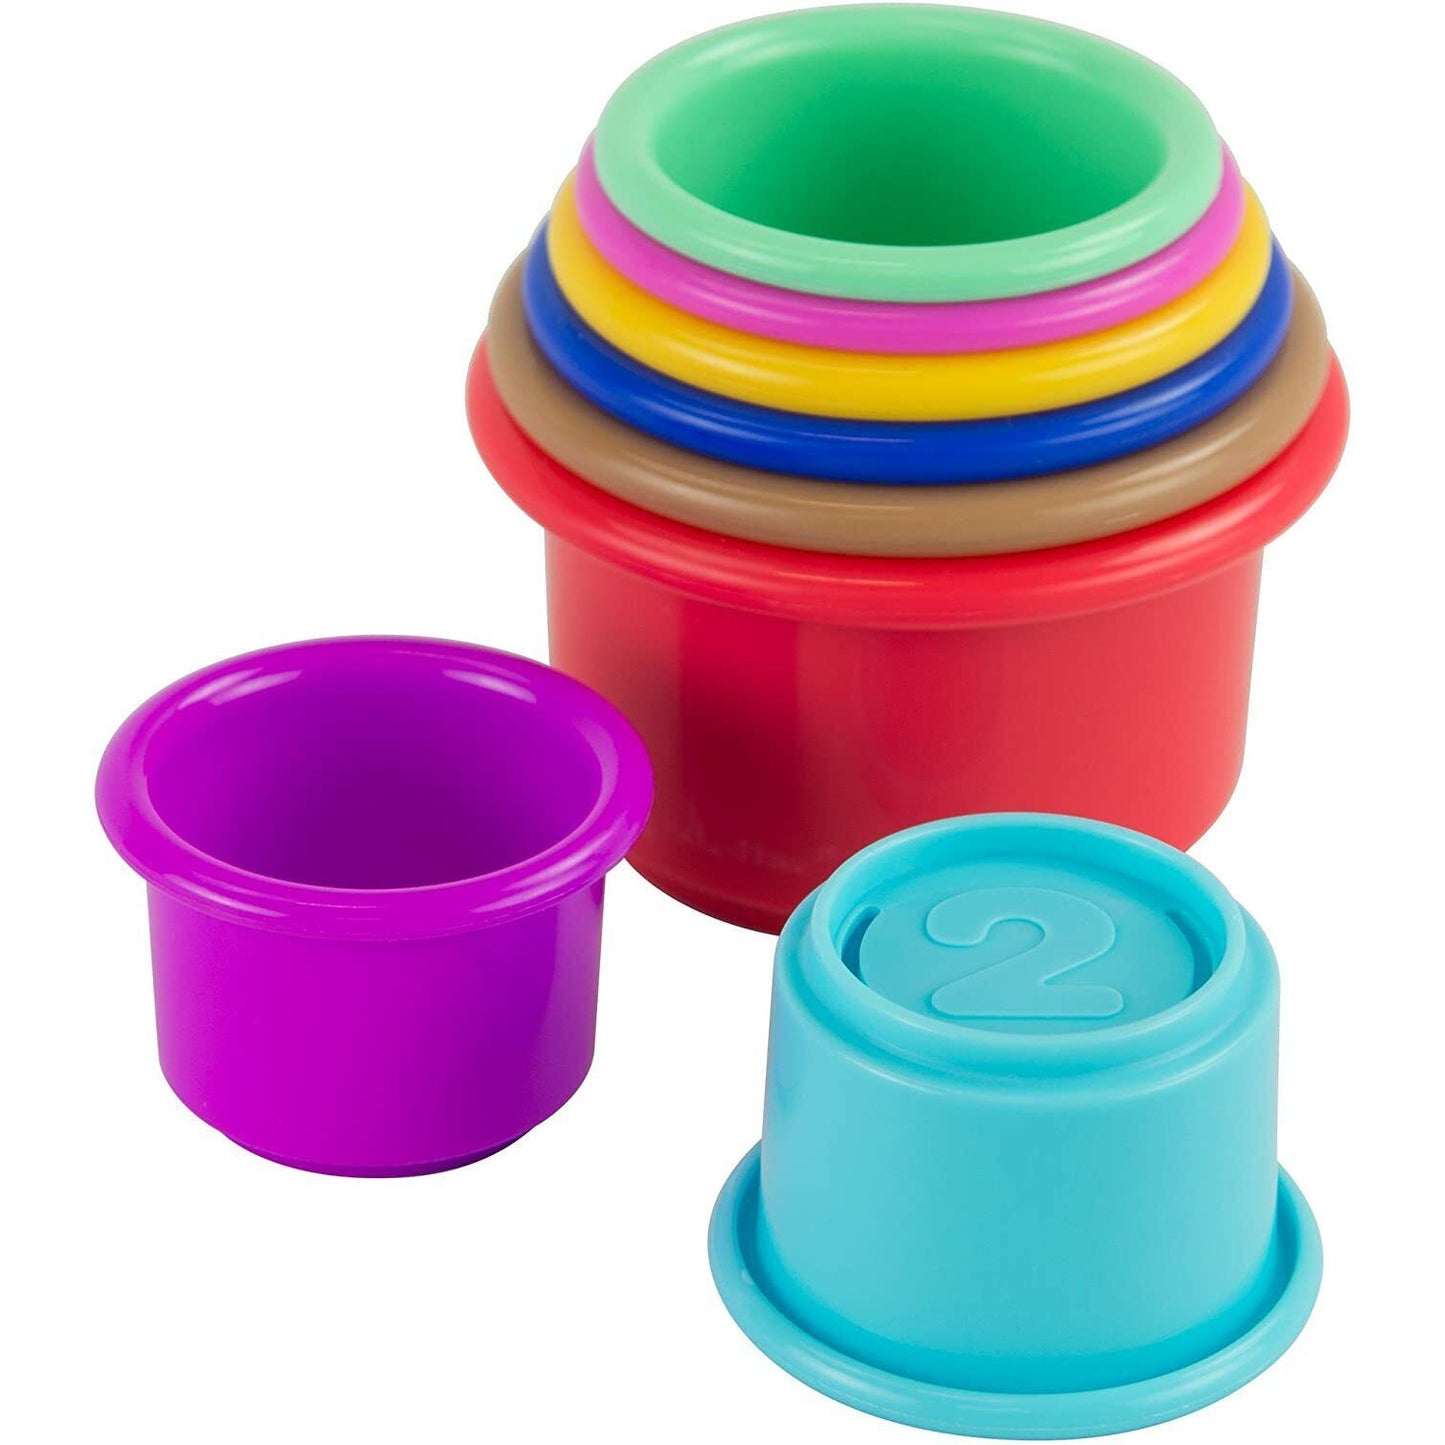 Lamaze Pile & Play Cups Baby & Toddler Sensory Learn Through Play Tactile Toy